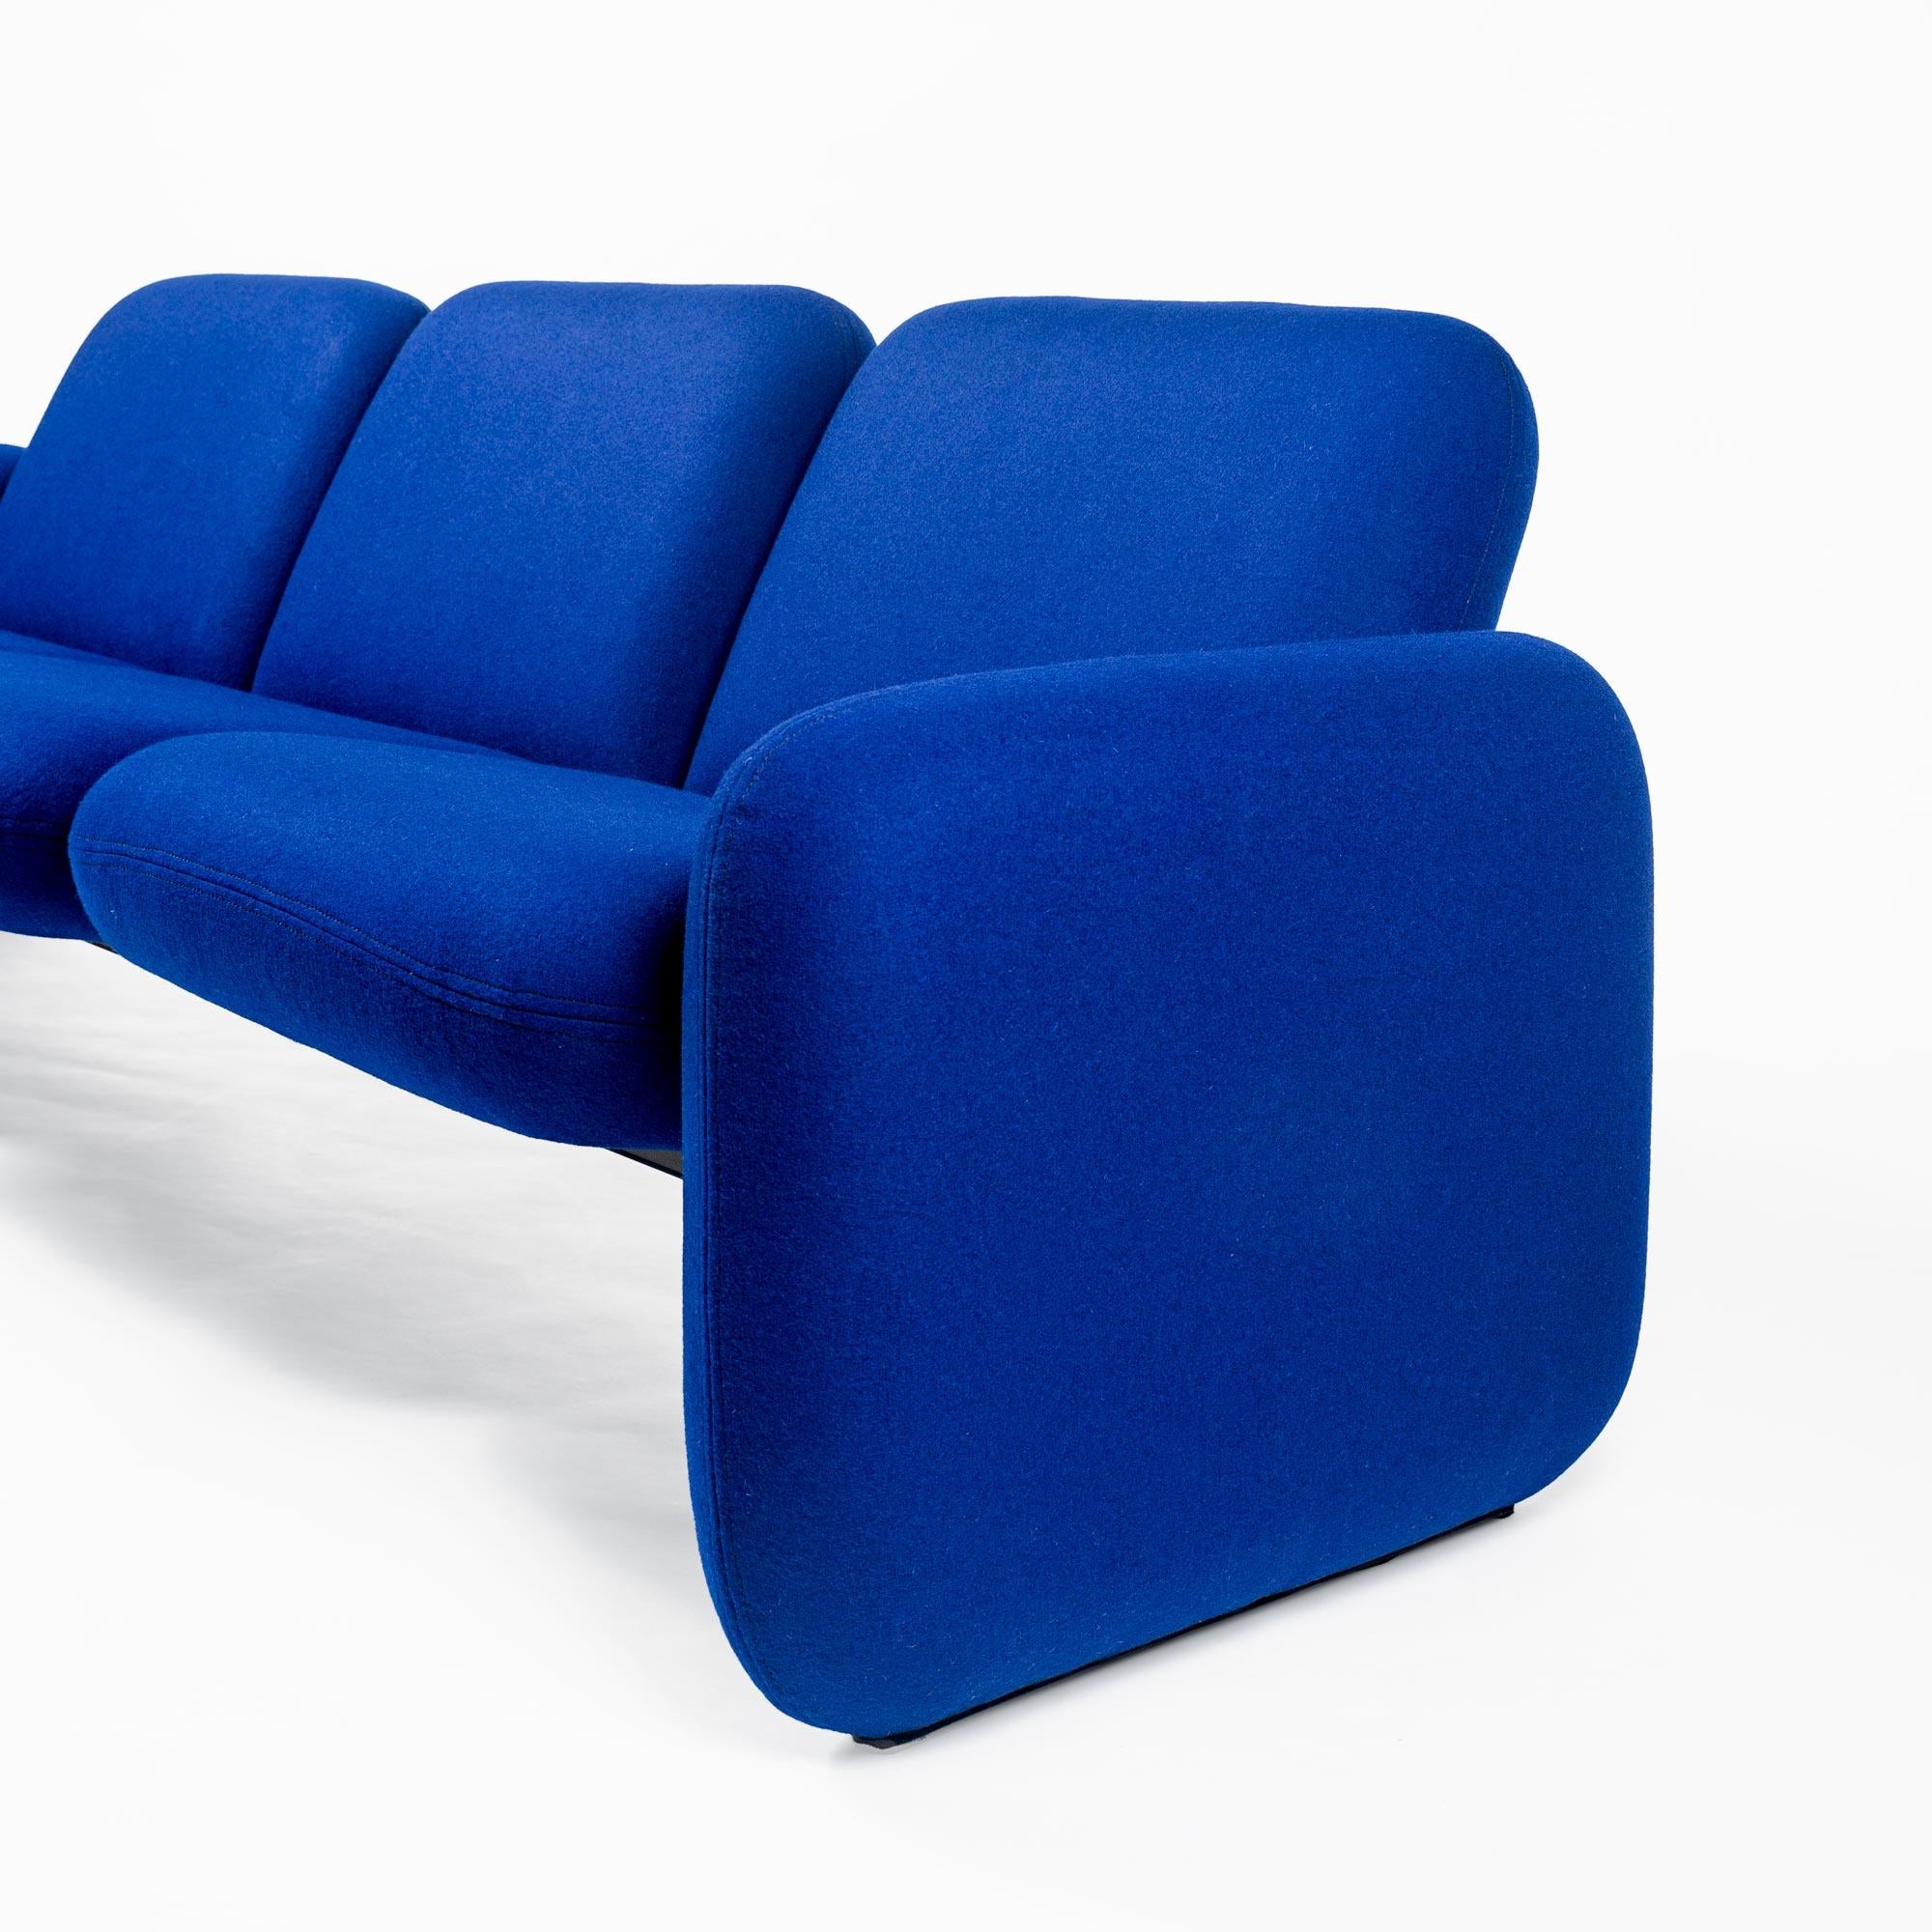 Other Ray Wilkes for Herman Miller Chiclet Sofa in Maharam Royal Blue